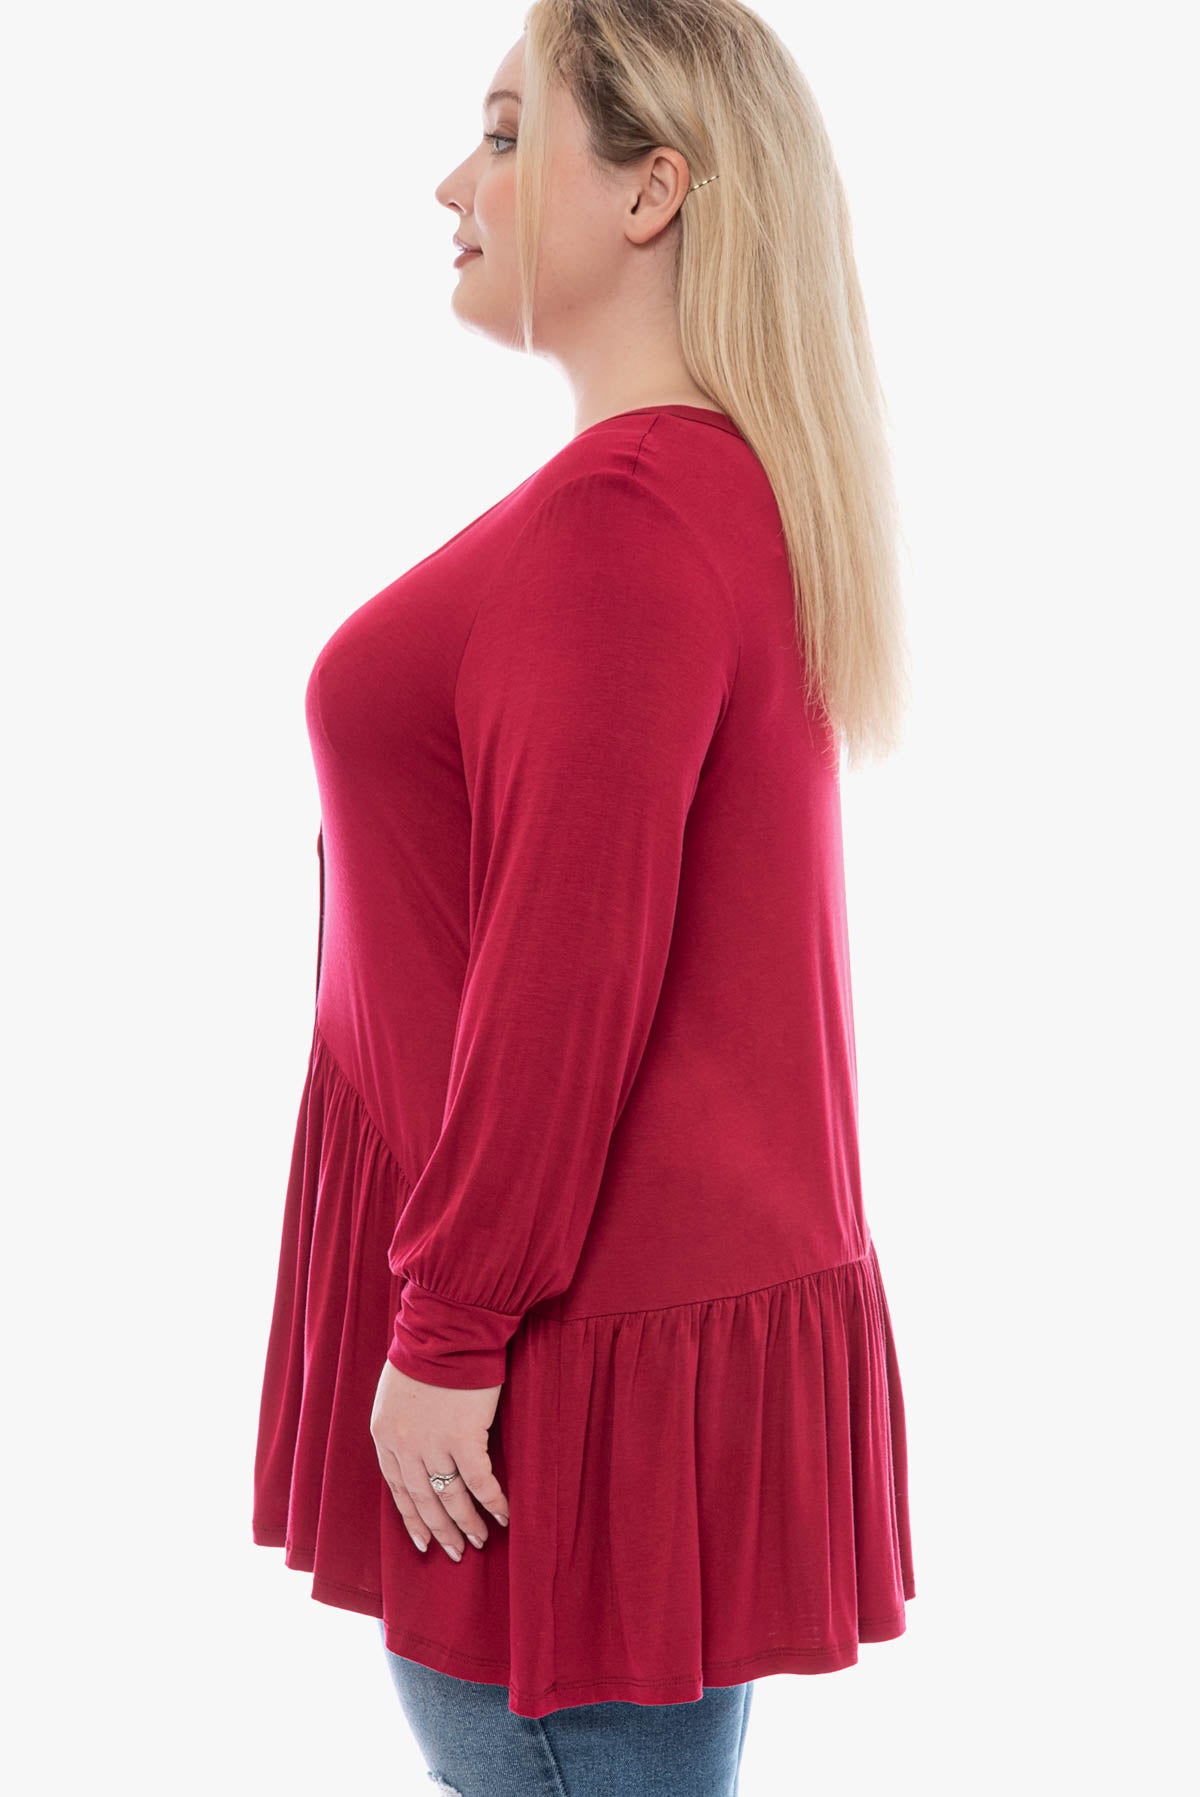 DARBY comfy long tunic